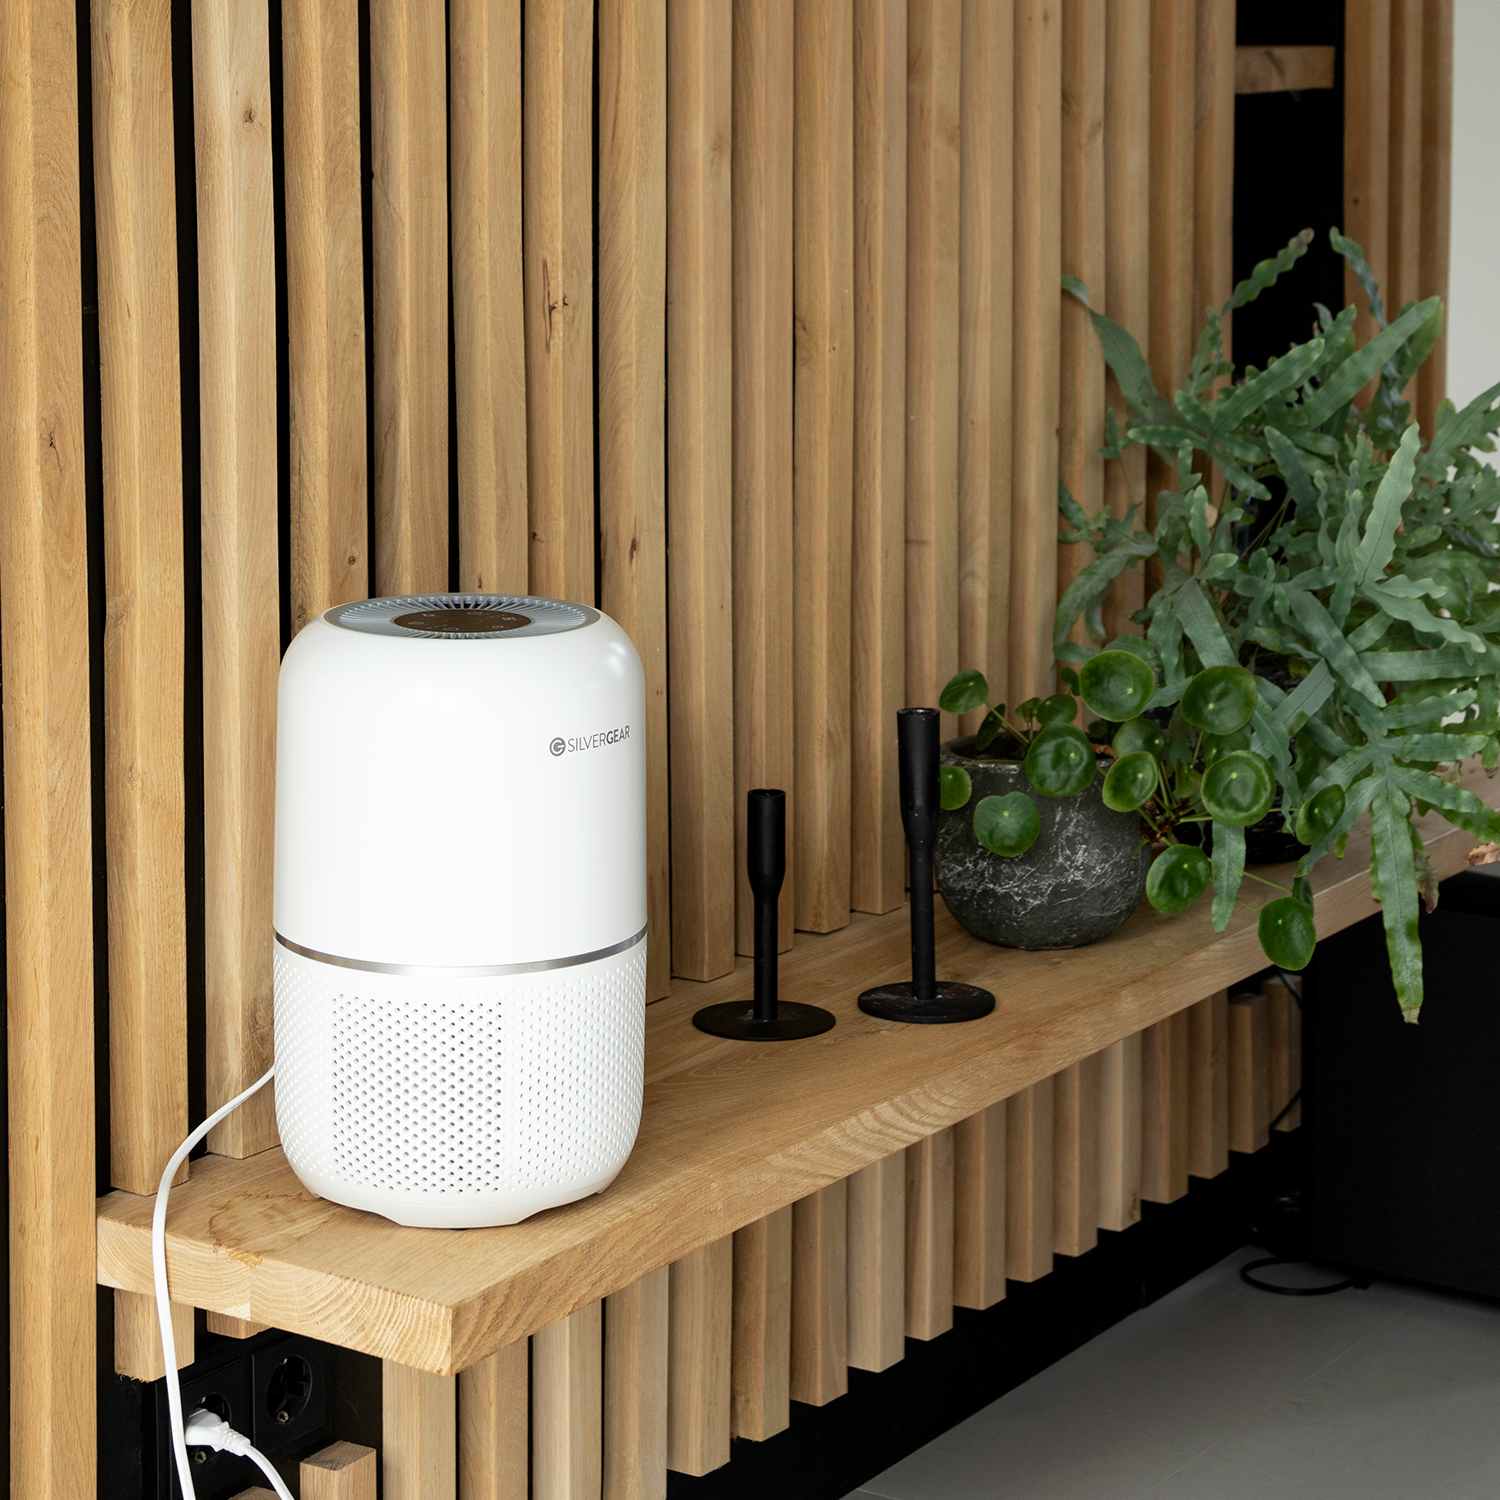 How does the air purifier work?